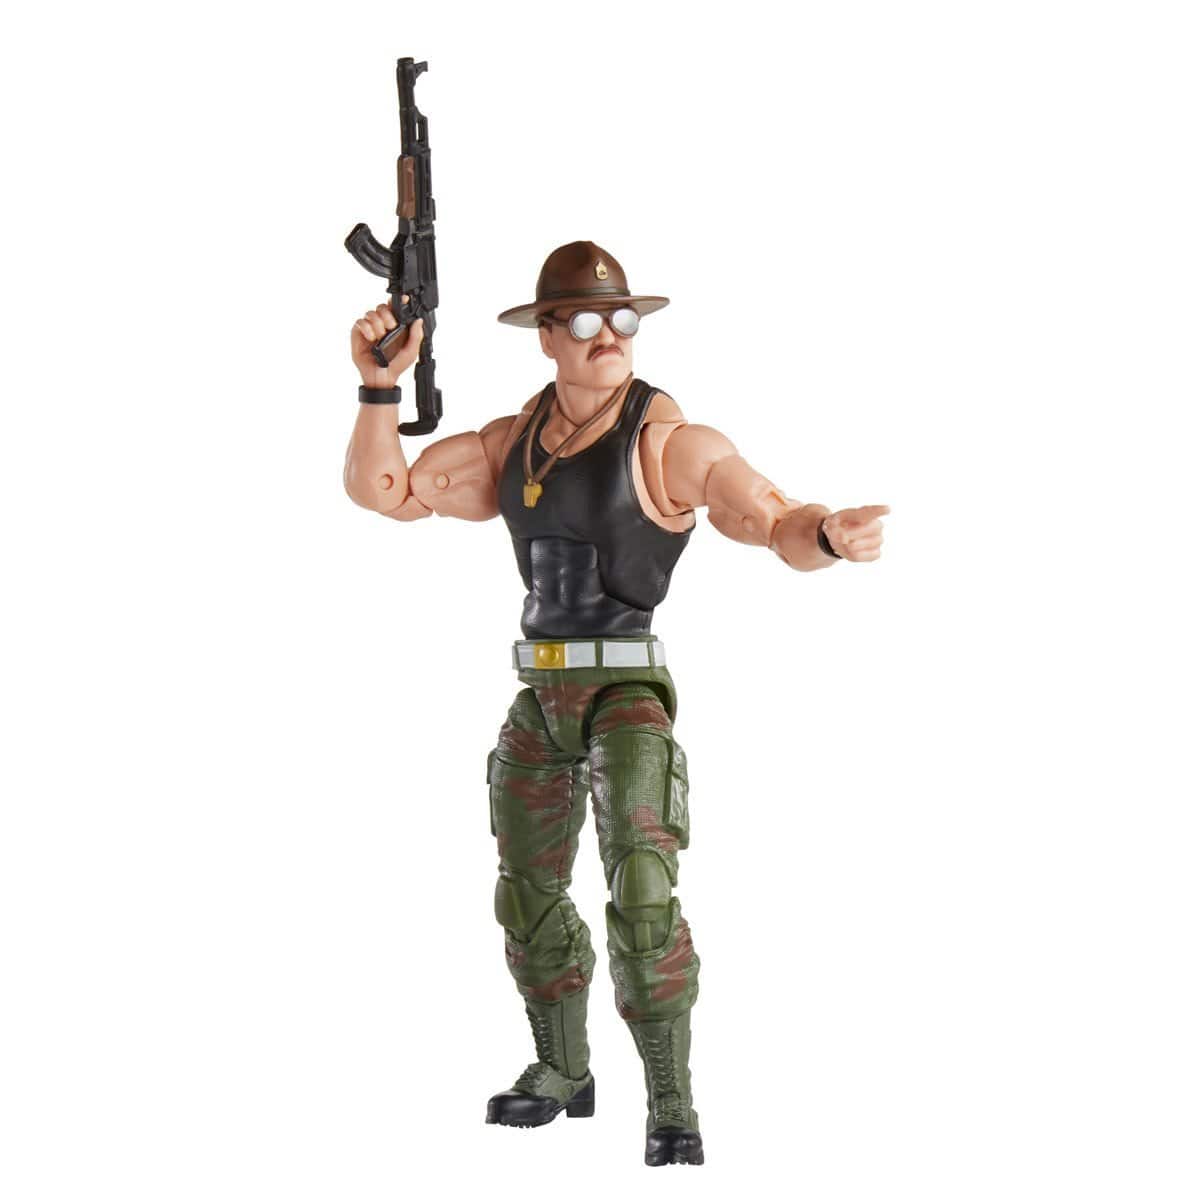 G.I. Joe Classified Series 6-Inch Sgt. Slaughter Action Figure - Exclusive Pop-O-Loco